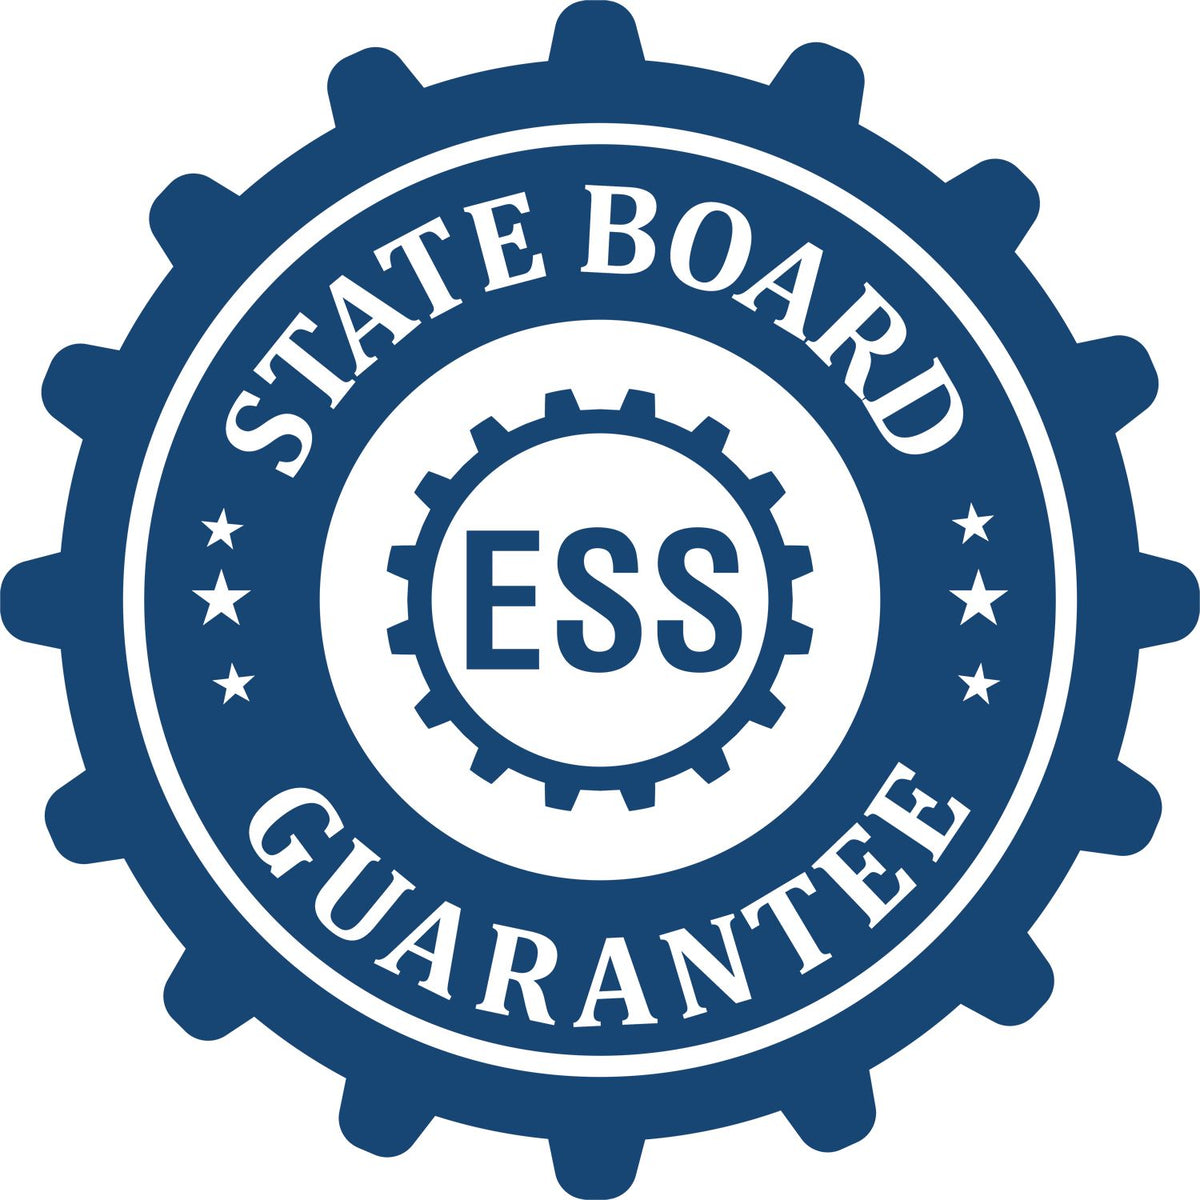 An emblem in a gear shape illustrating a state board guarantee for the Wooden Handle Oklahoma State Seal Notary Public Stamp product.